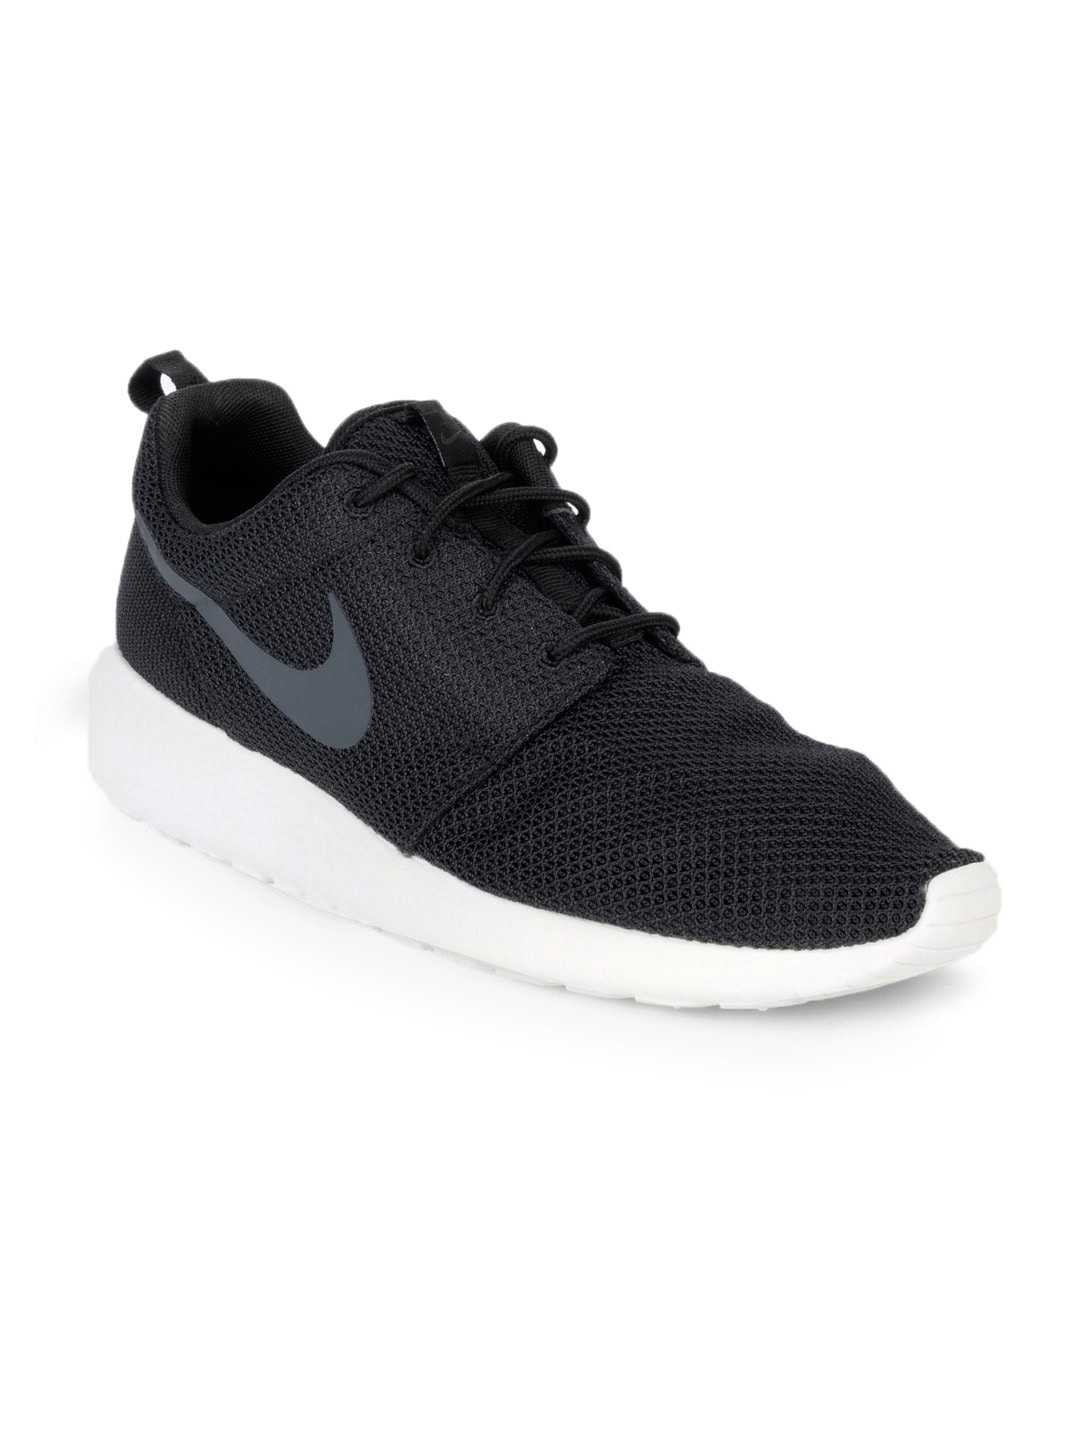 Nike Men Black Roshe One NSW Casual Shoes